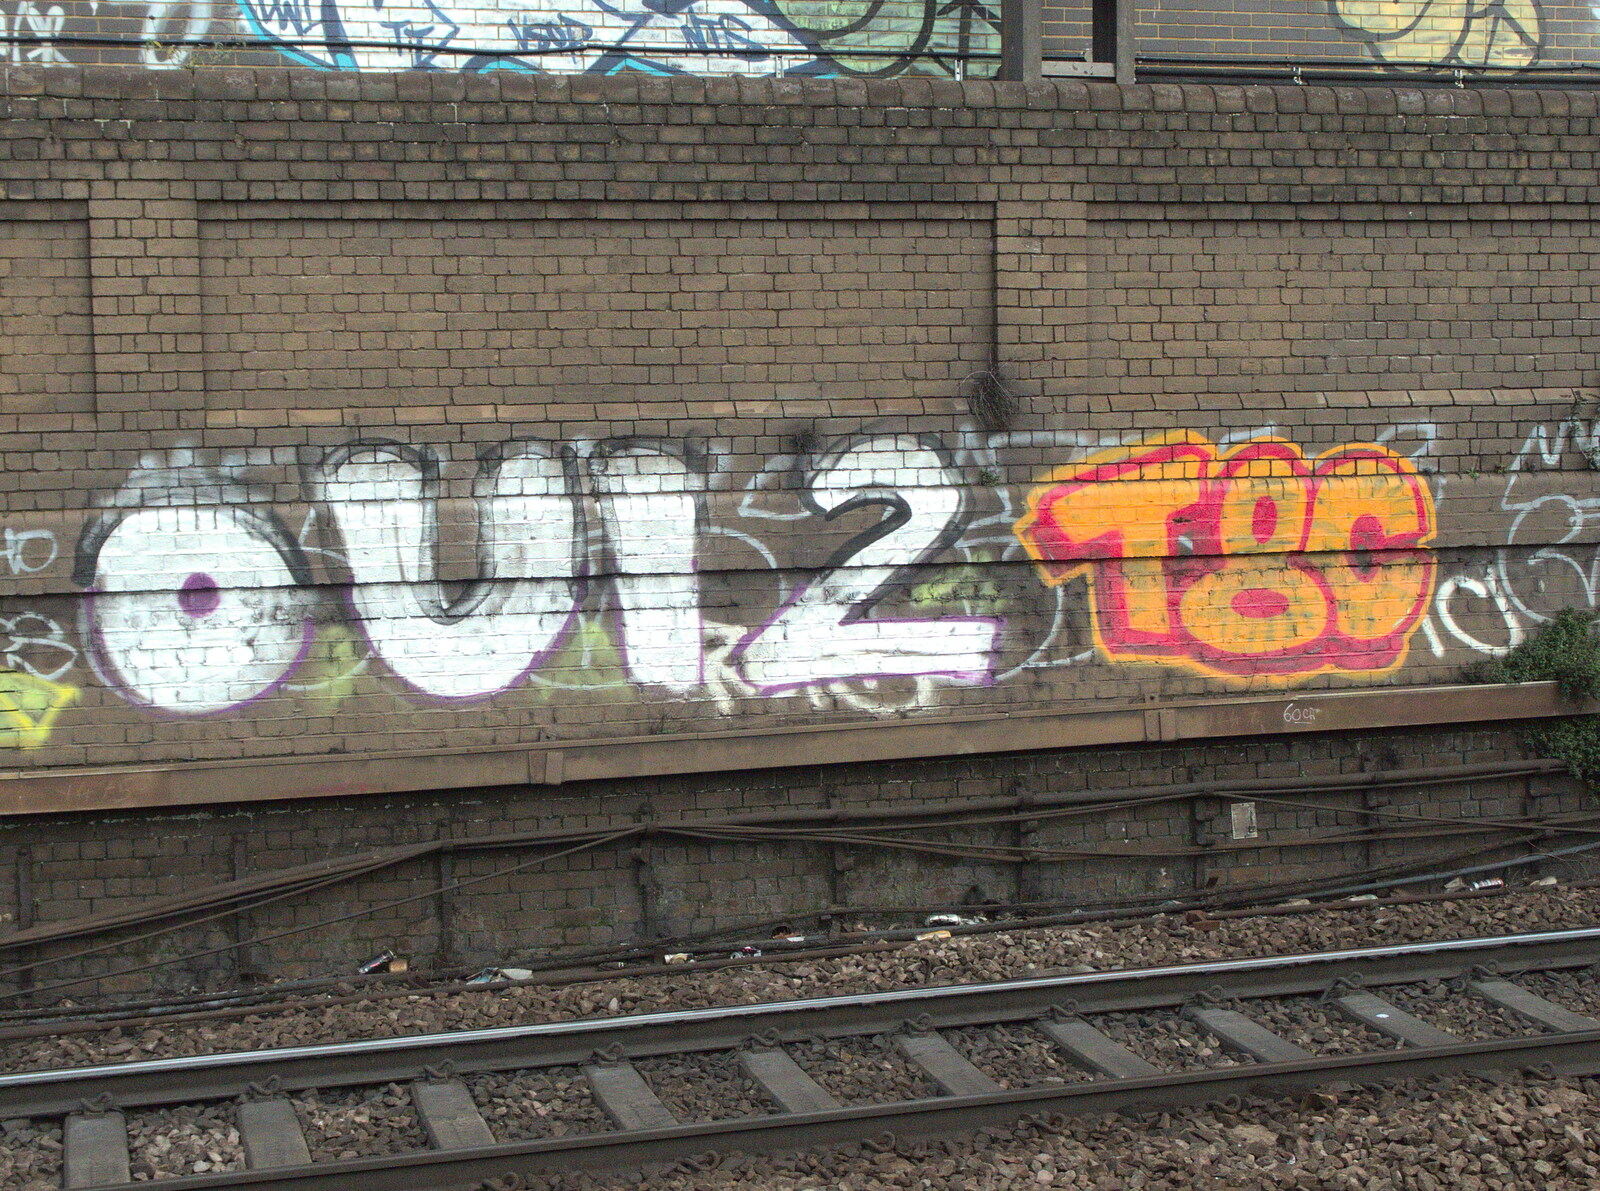 Oui 2 and T8C tags from Railway Graffiti, Tower Hamlets, London - 12th February 2019